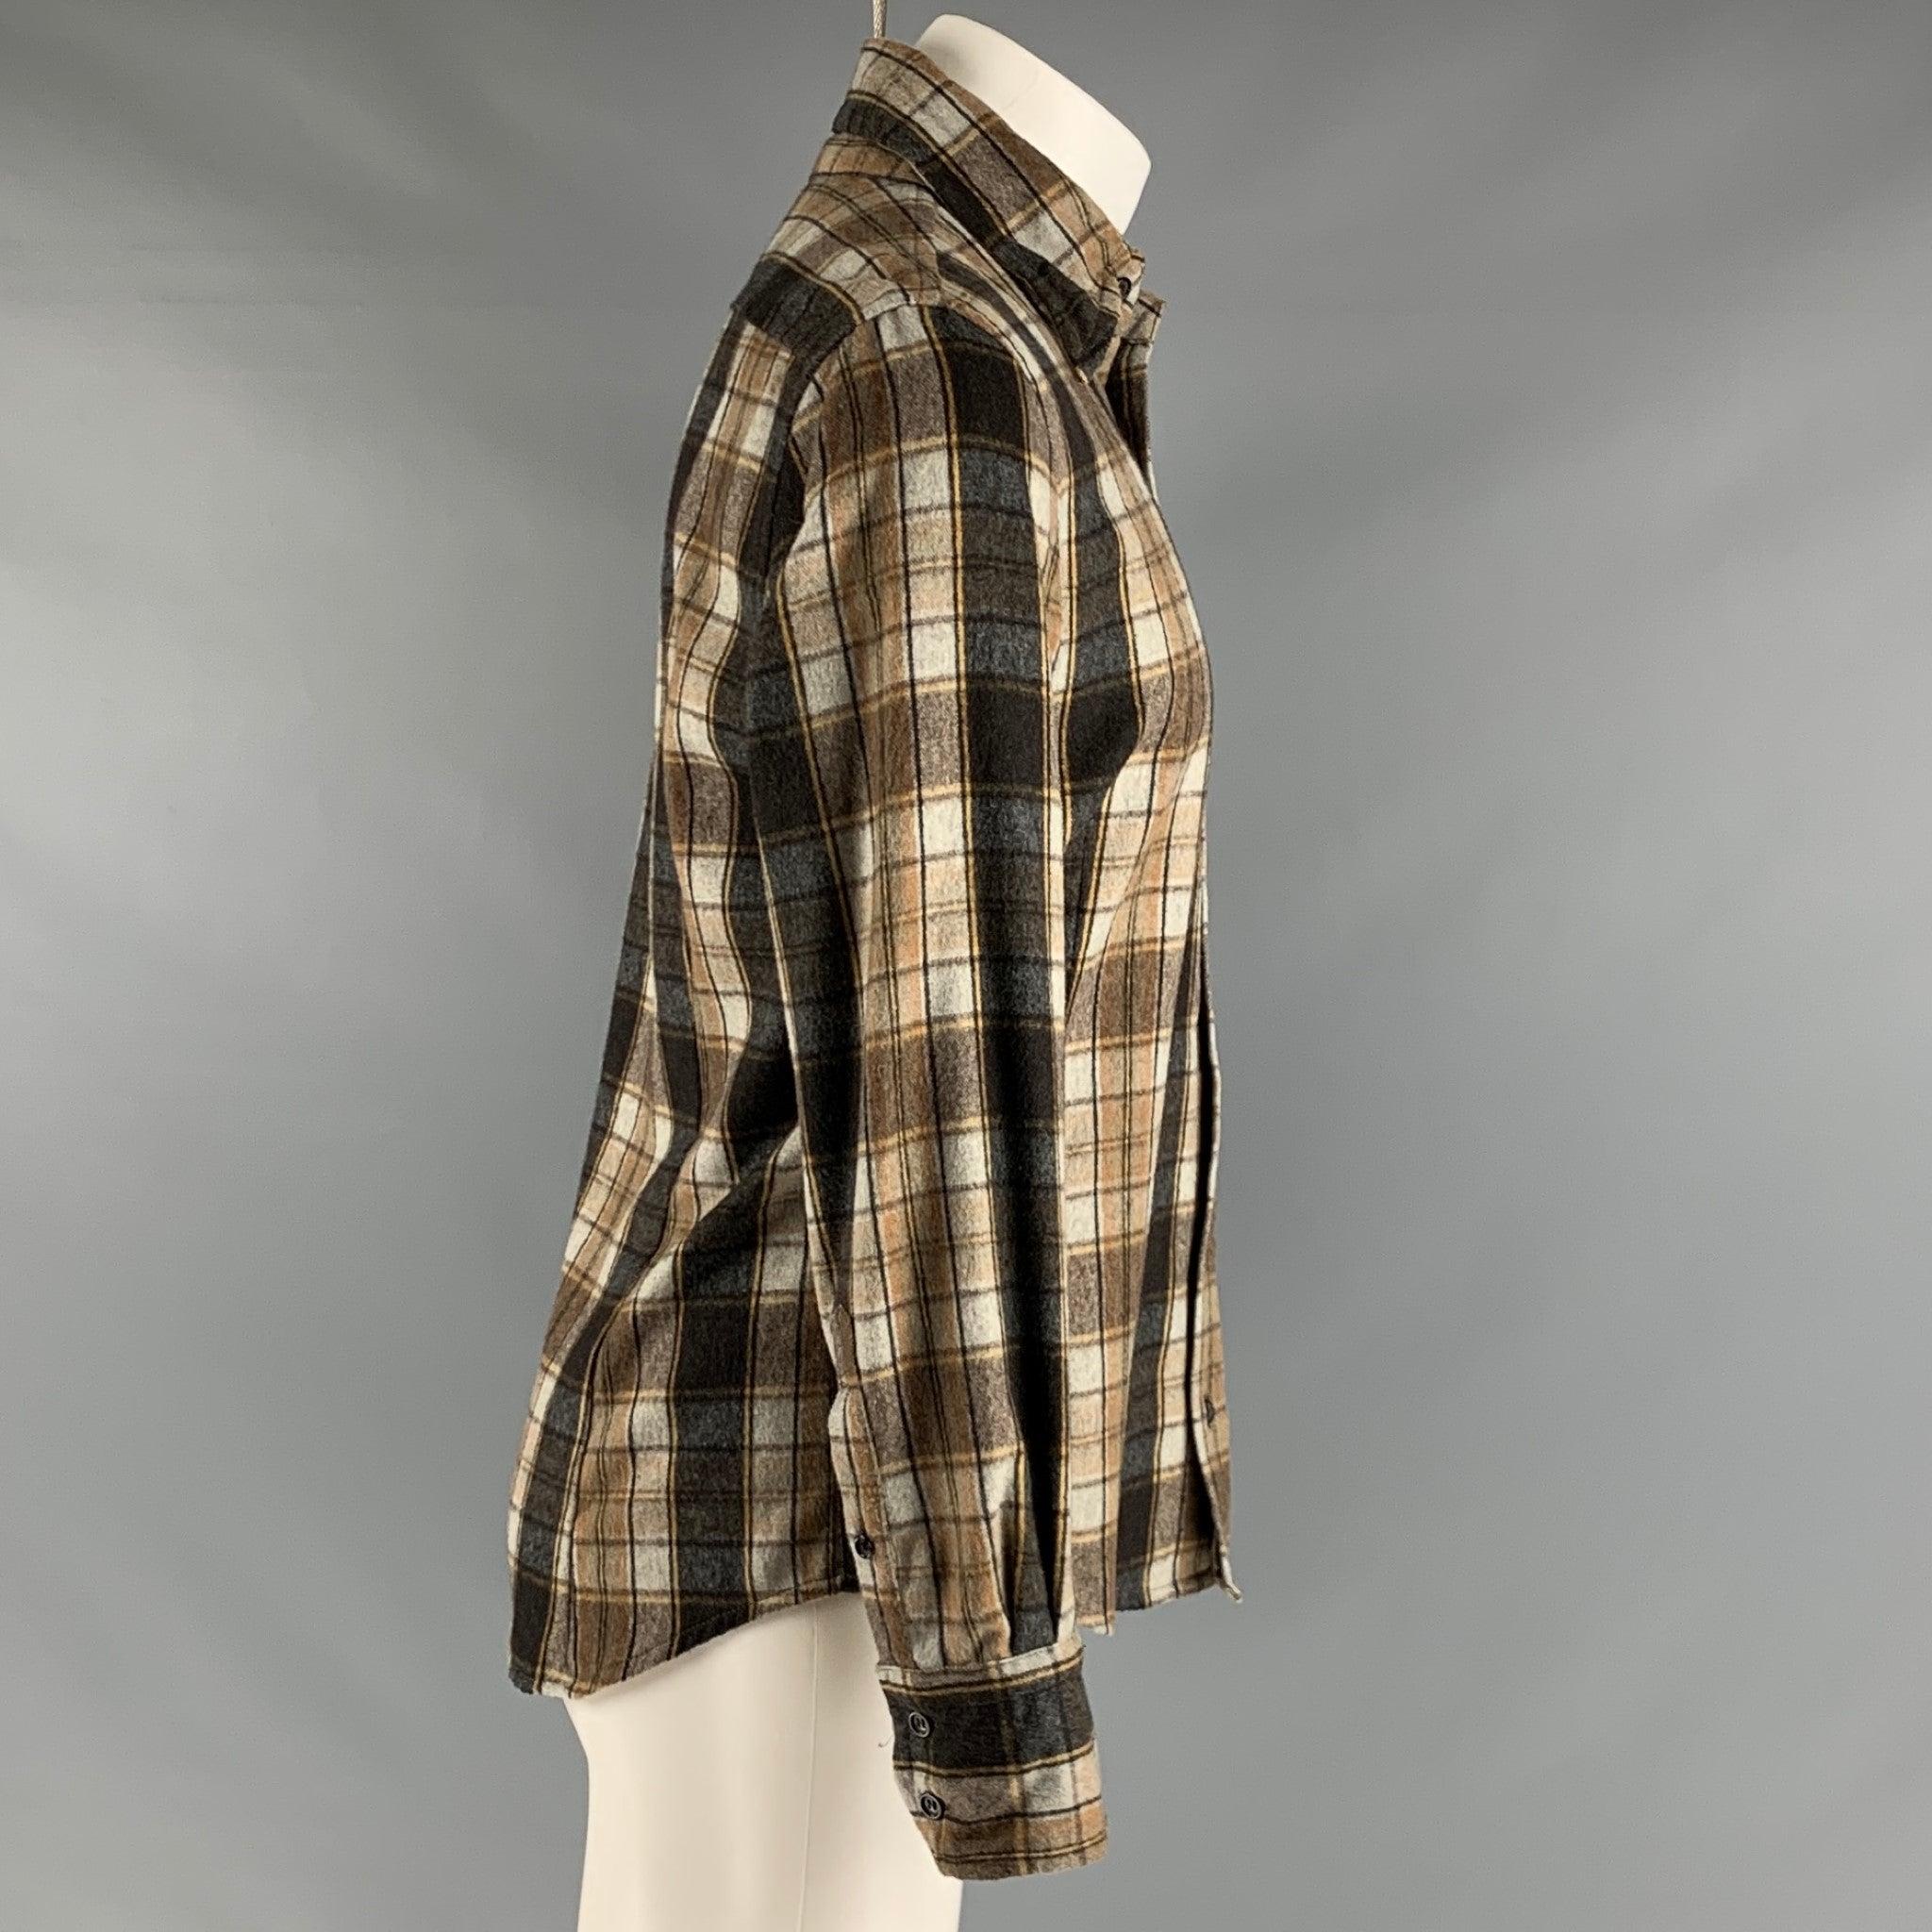 DSQUARED2 long sleeve shirt comes in a brown and beige plaid wool/polyester woven material featuring spread collar, and a button up closure. Made in Italy. Good Pre-Owned Condition. 

Marked:   50 

Measurements: 
 
Shoulder: 17.5 inches Chest: 44